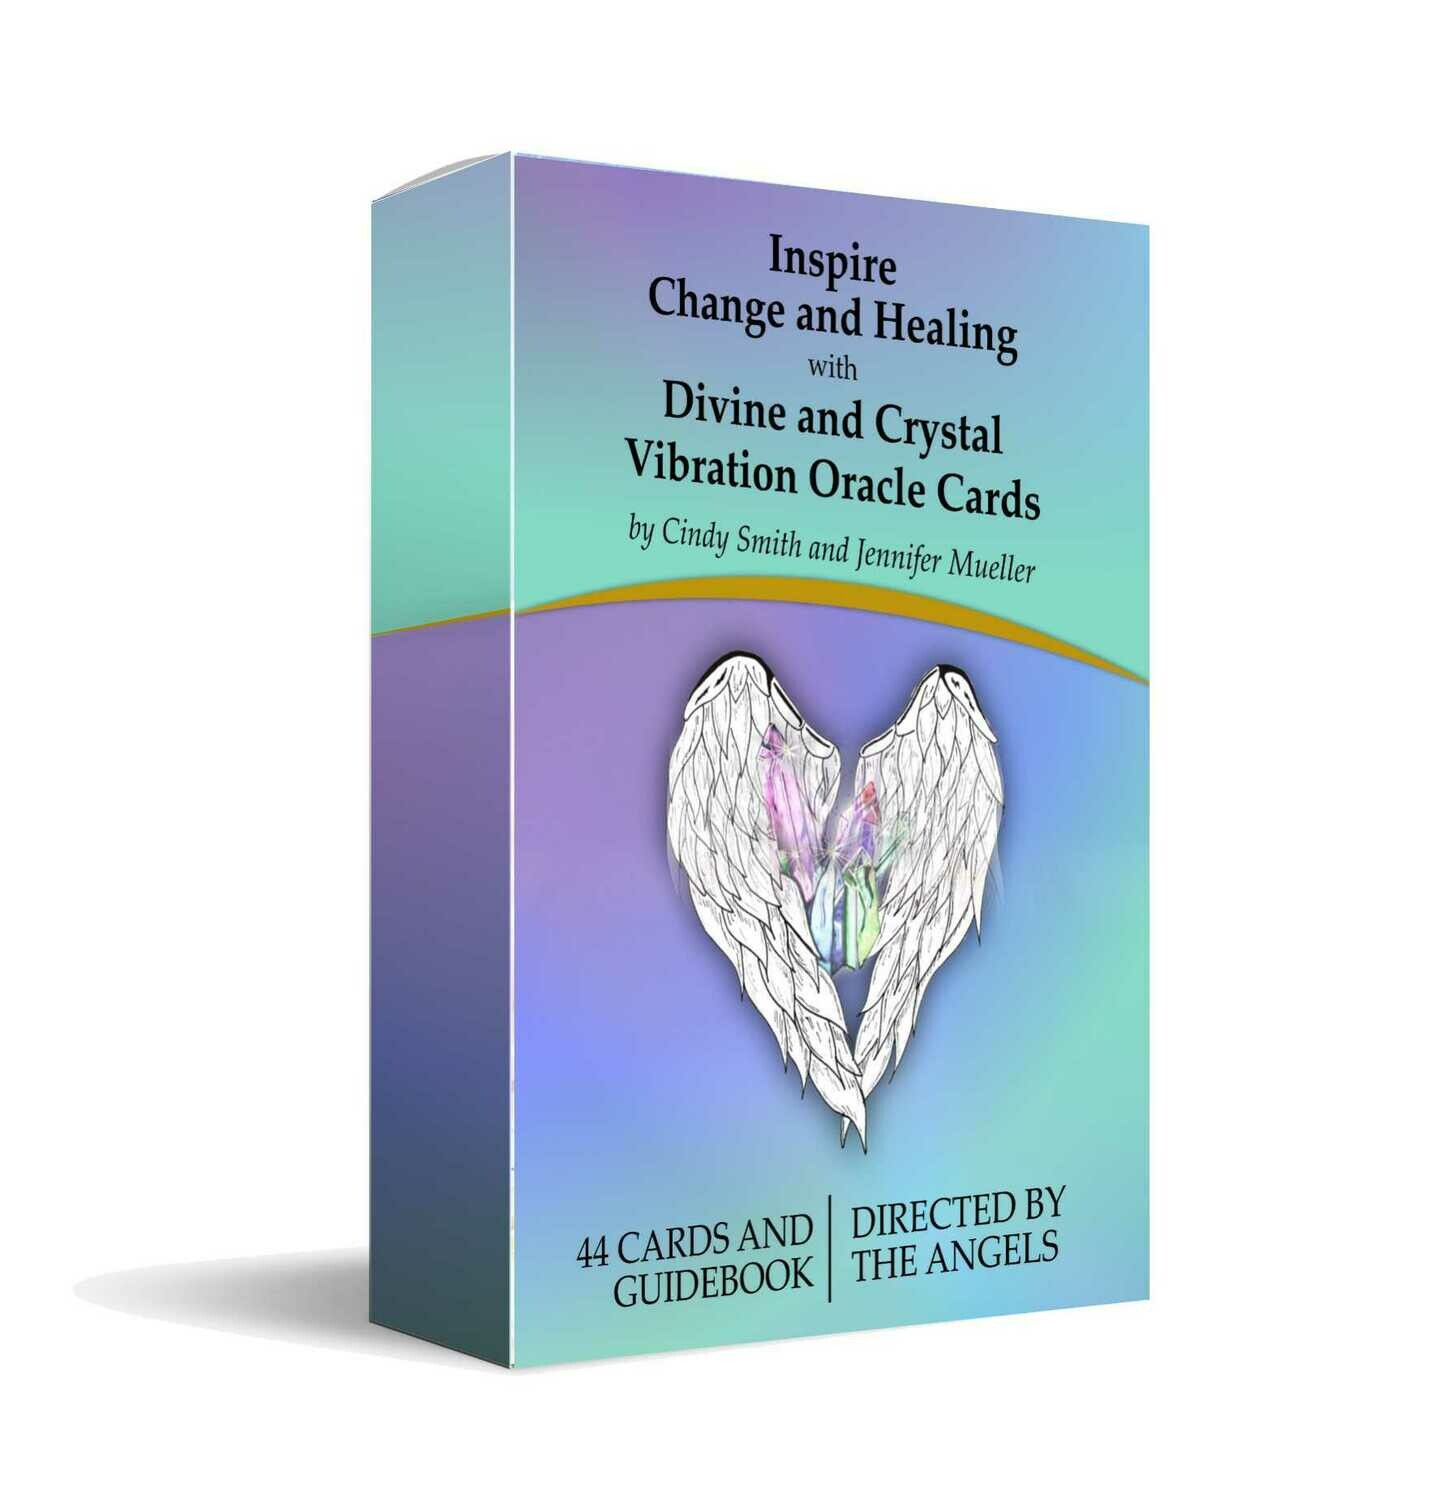 Divine and Crystal Vibration Oracle Deck